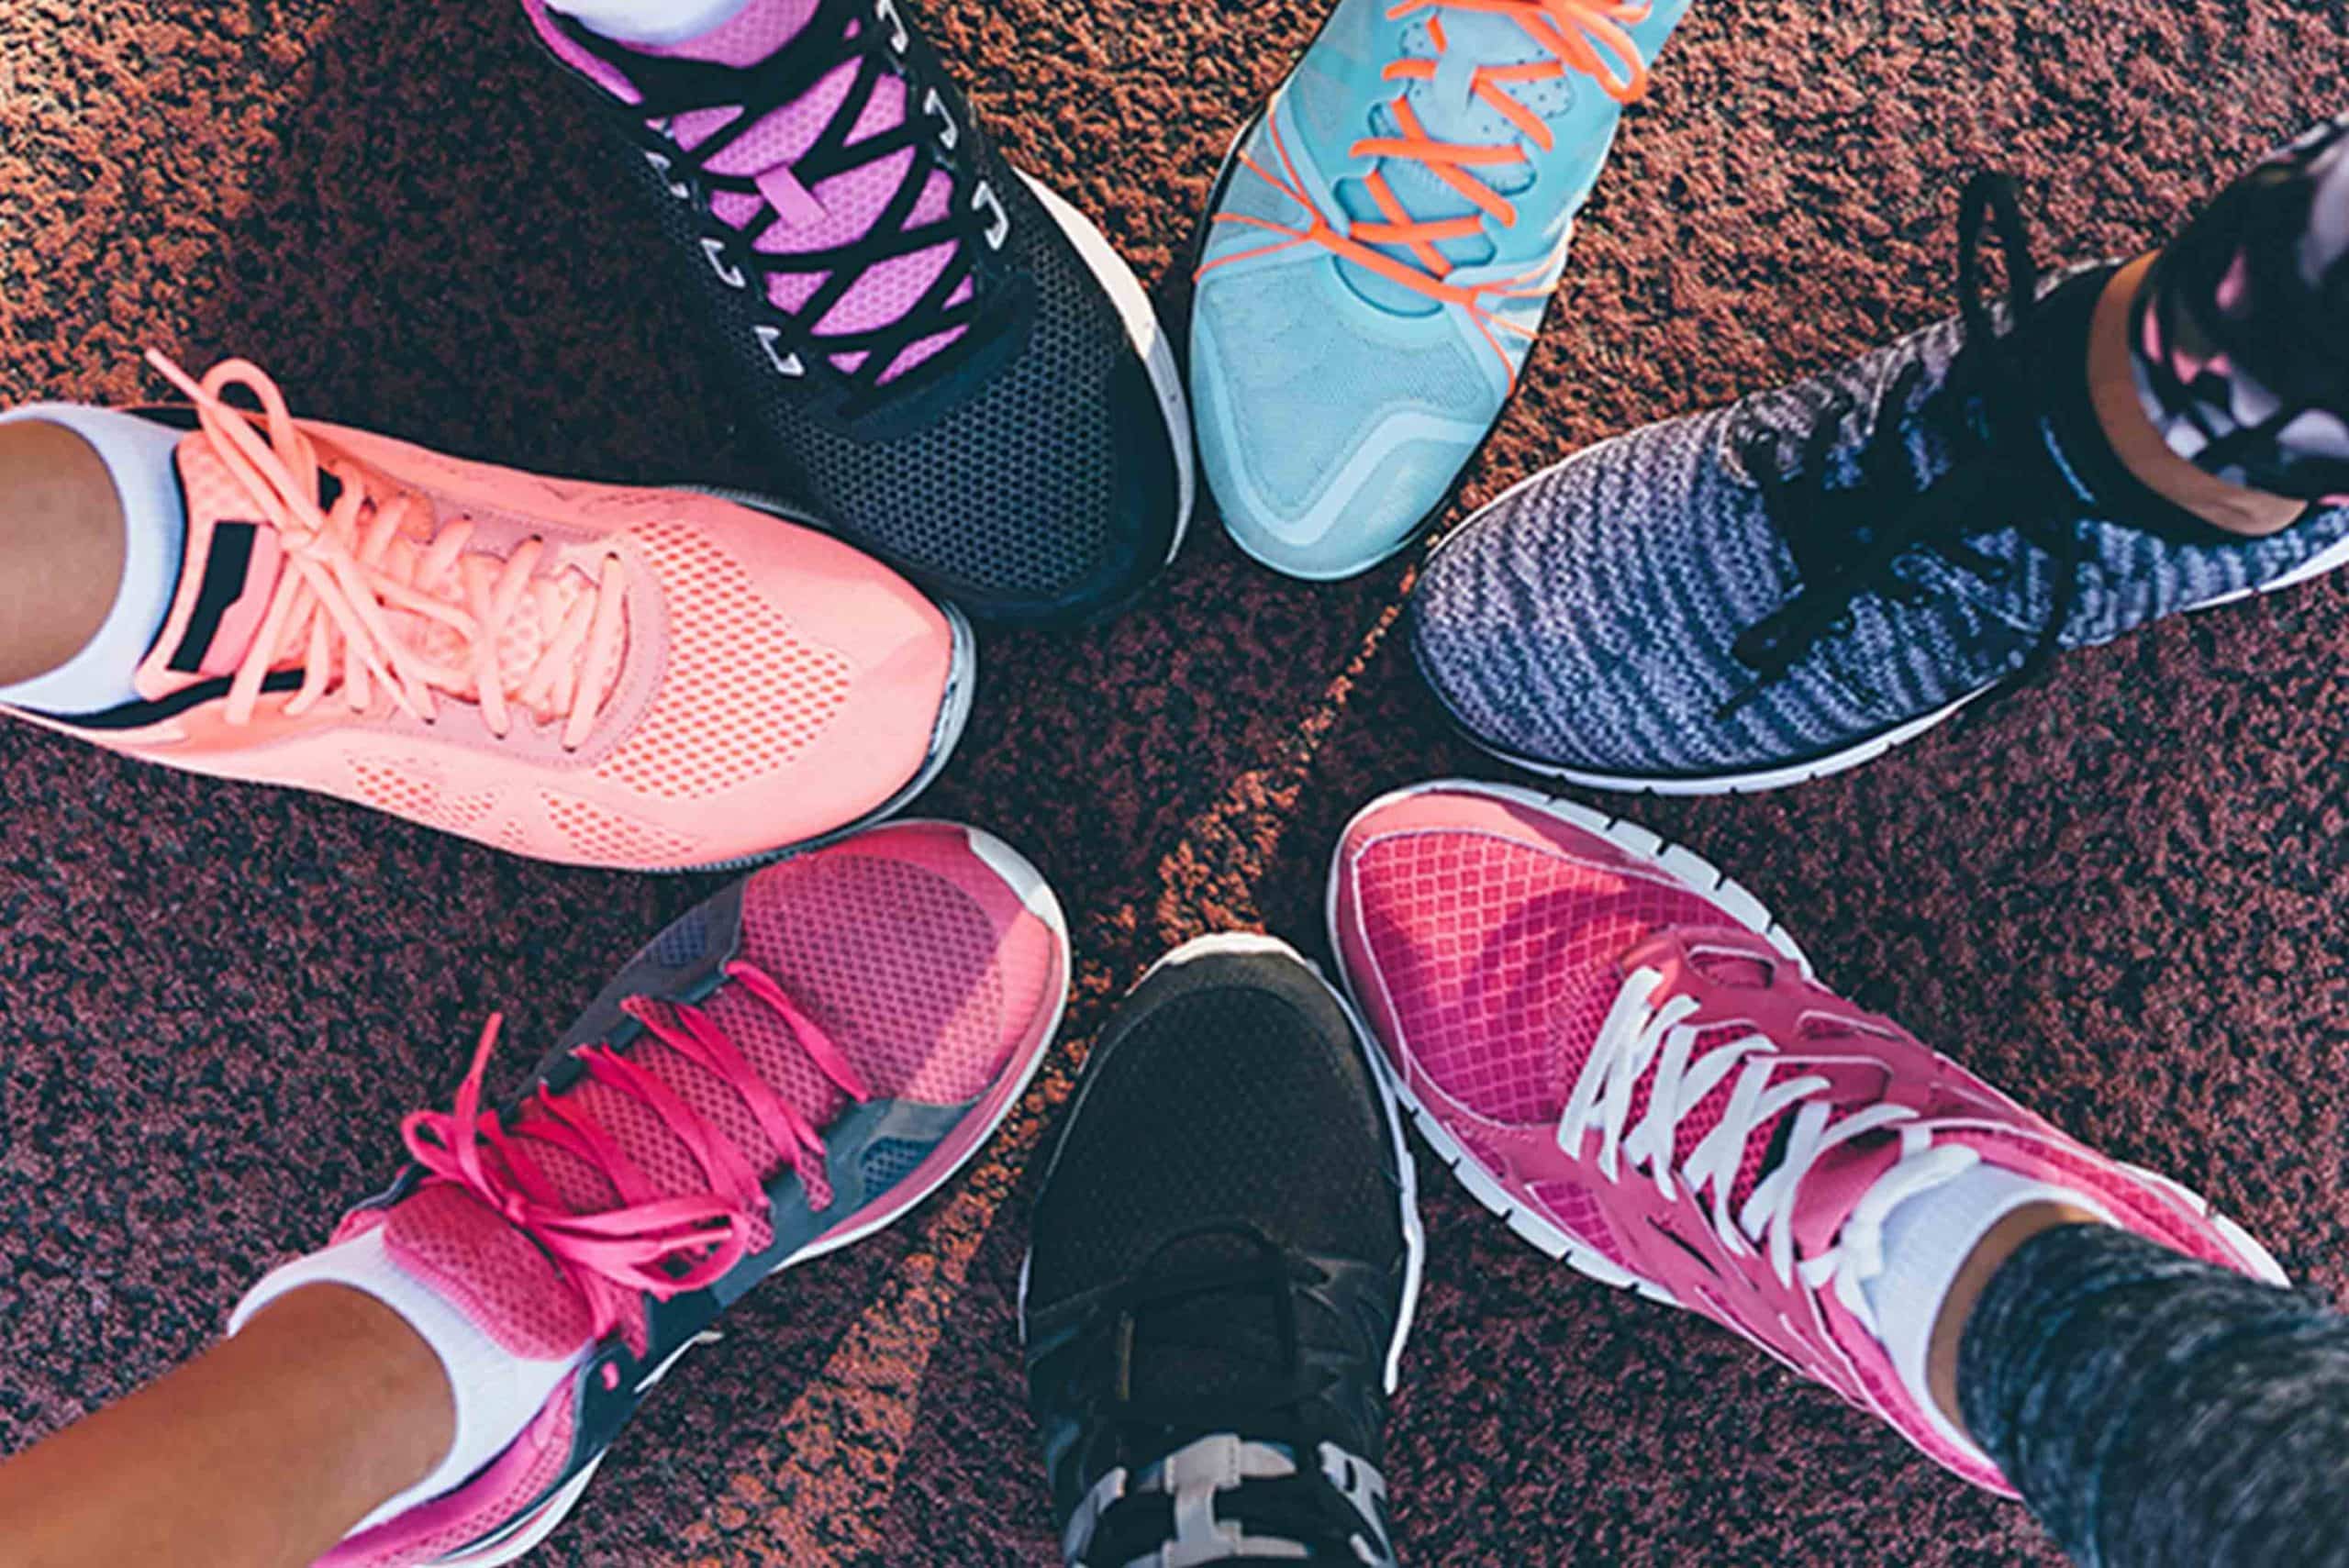 Image of feet of different people wearing colourful sneakers forming a circle.